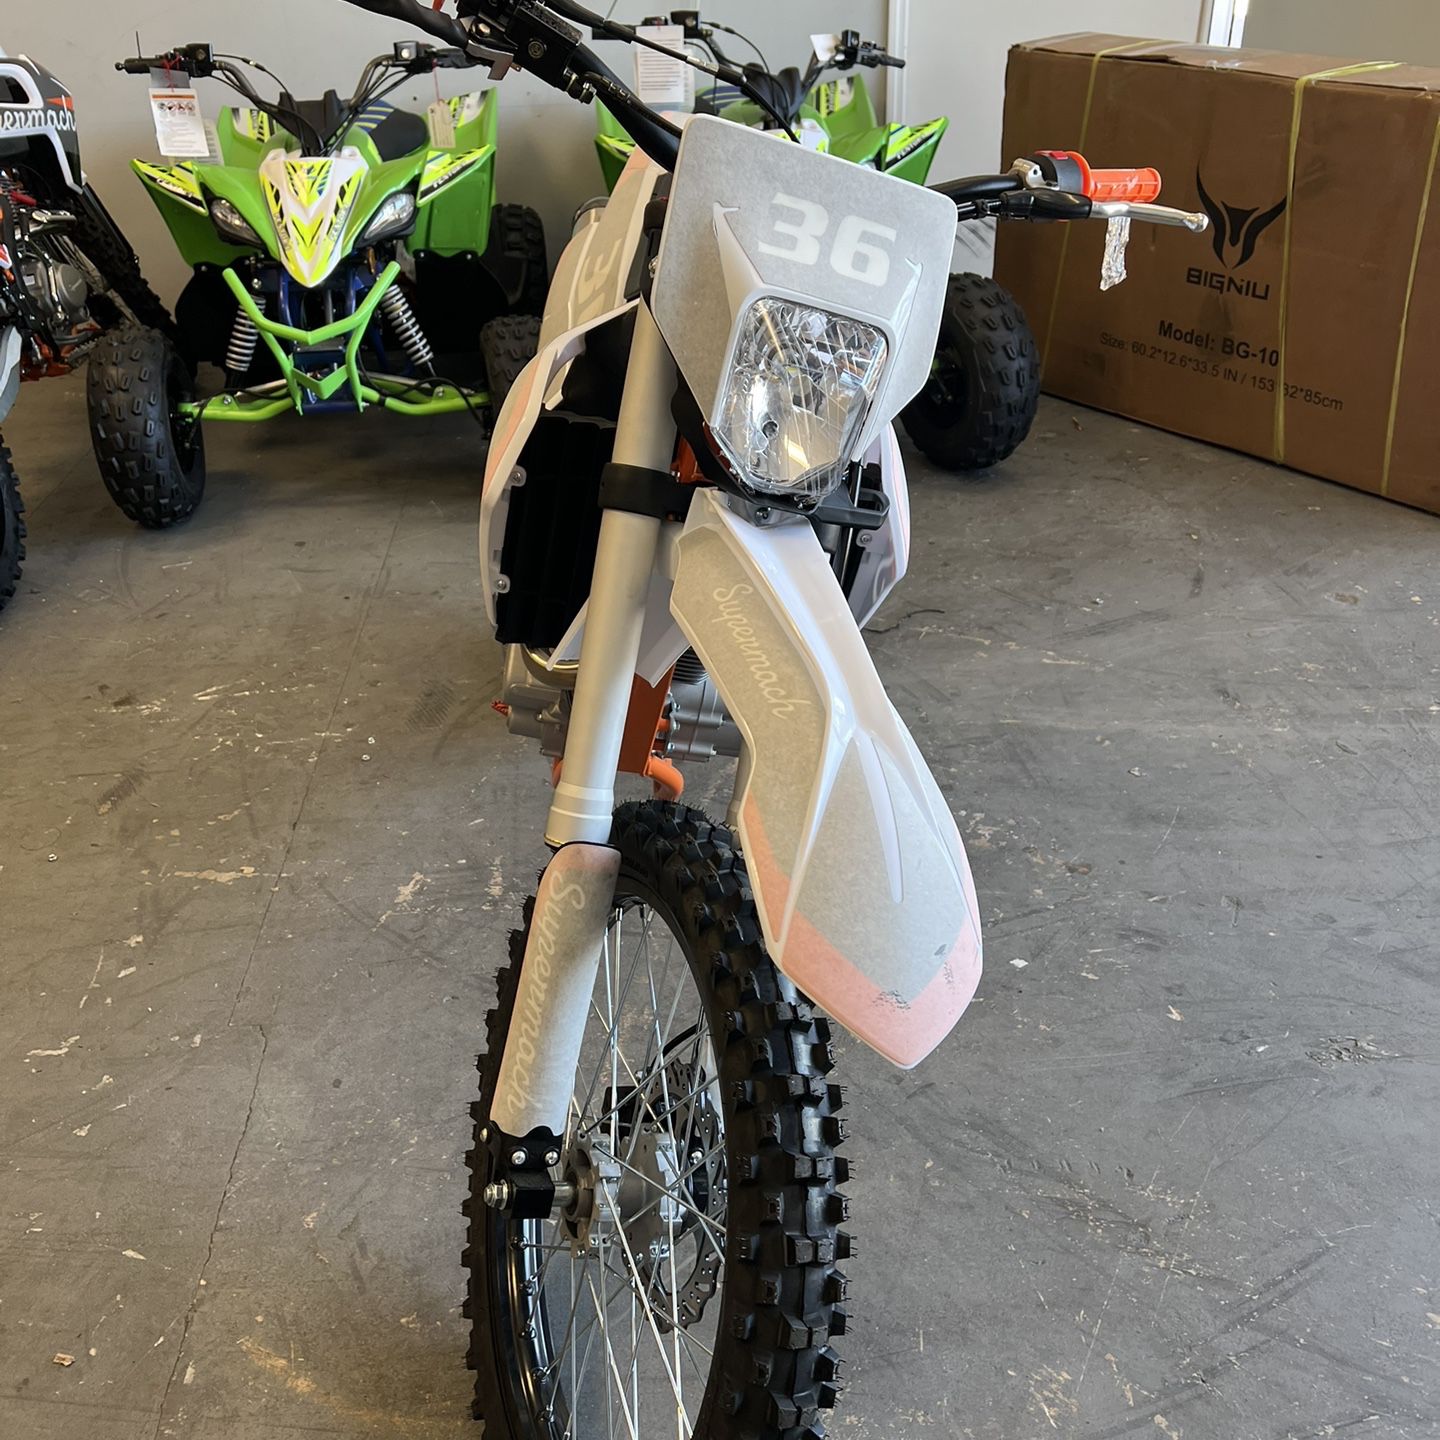 Supermach 250cc Dirt Bike! Finance For $50 Down Payment!!